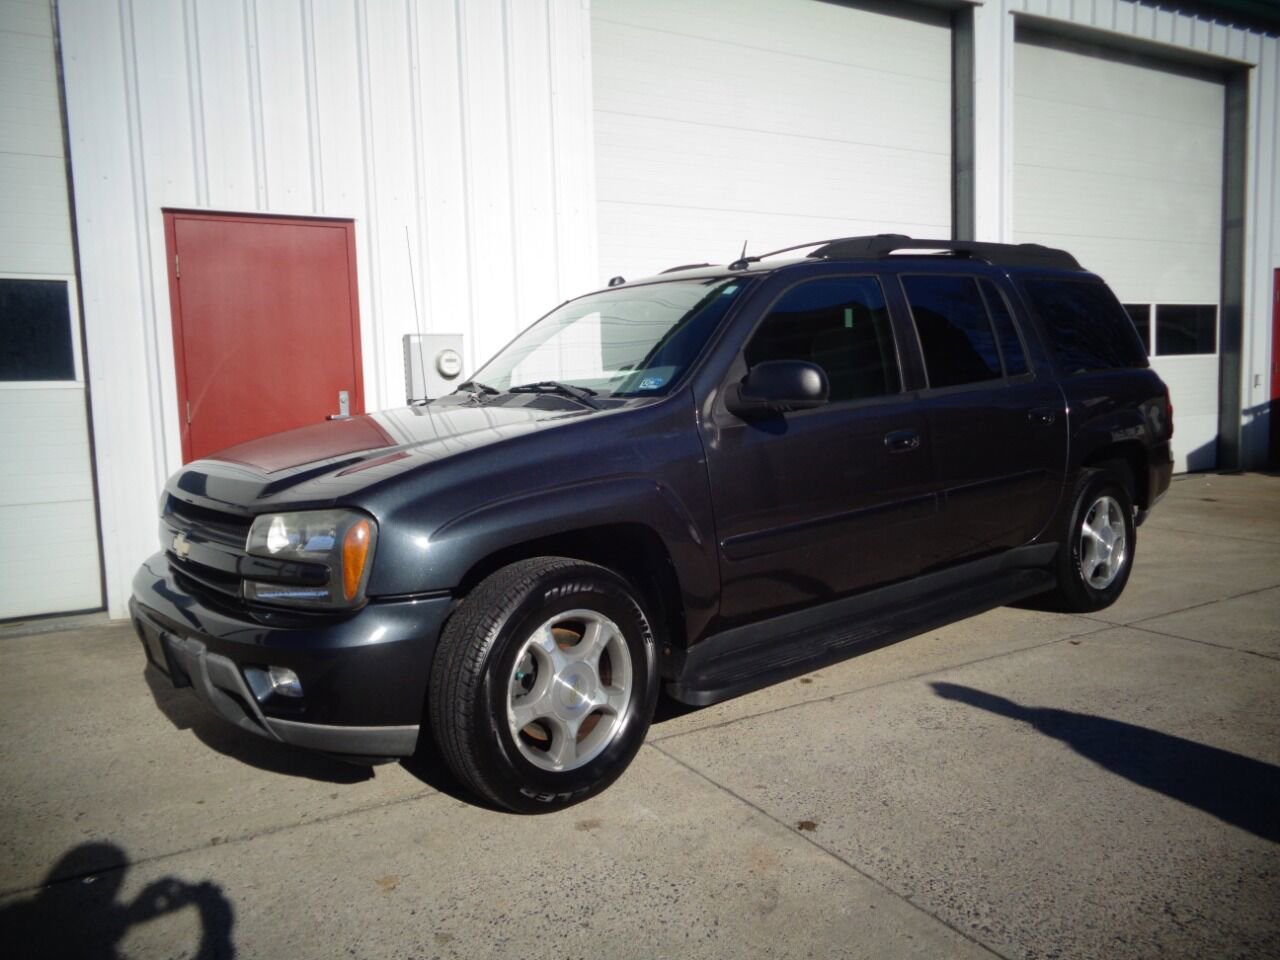 Used Chevrolet TrailBlazer EXT for Sale Near Me in Germantown, MD -  Autotrader